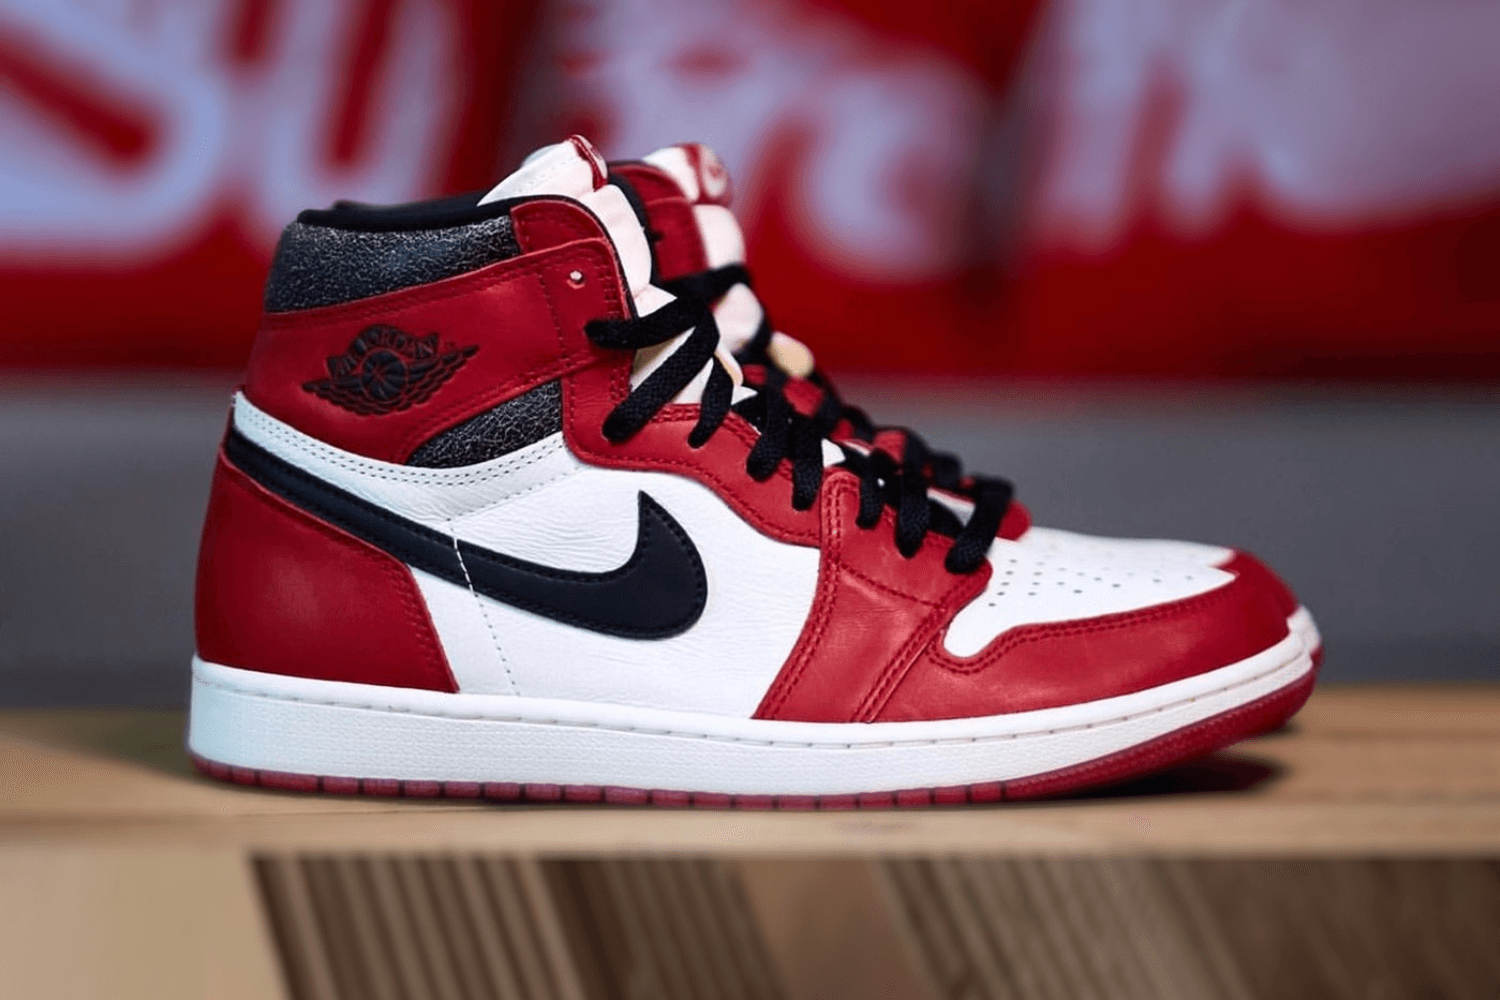 The Air Jordan 1 High OG 'Chicago Reimagined' has special packaging